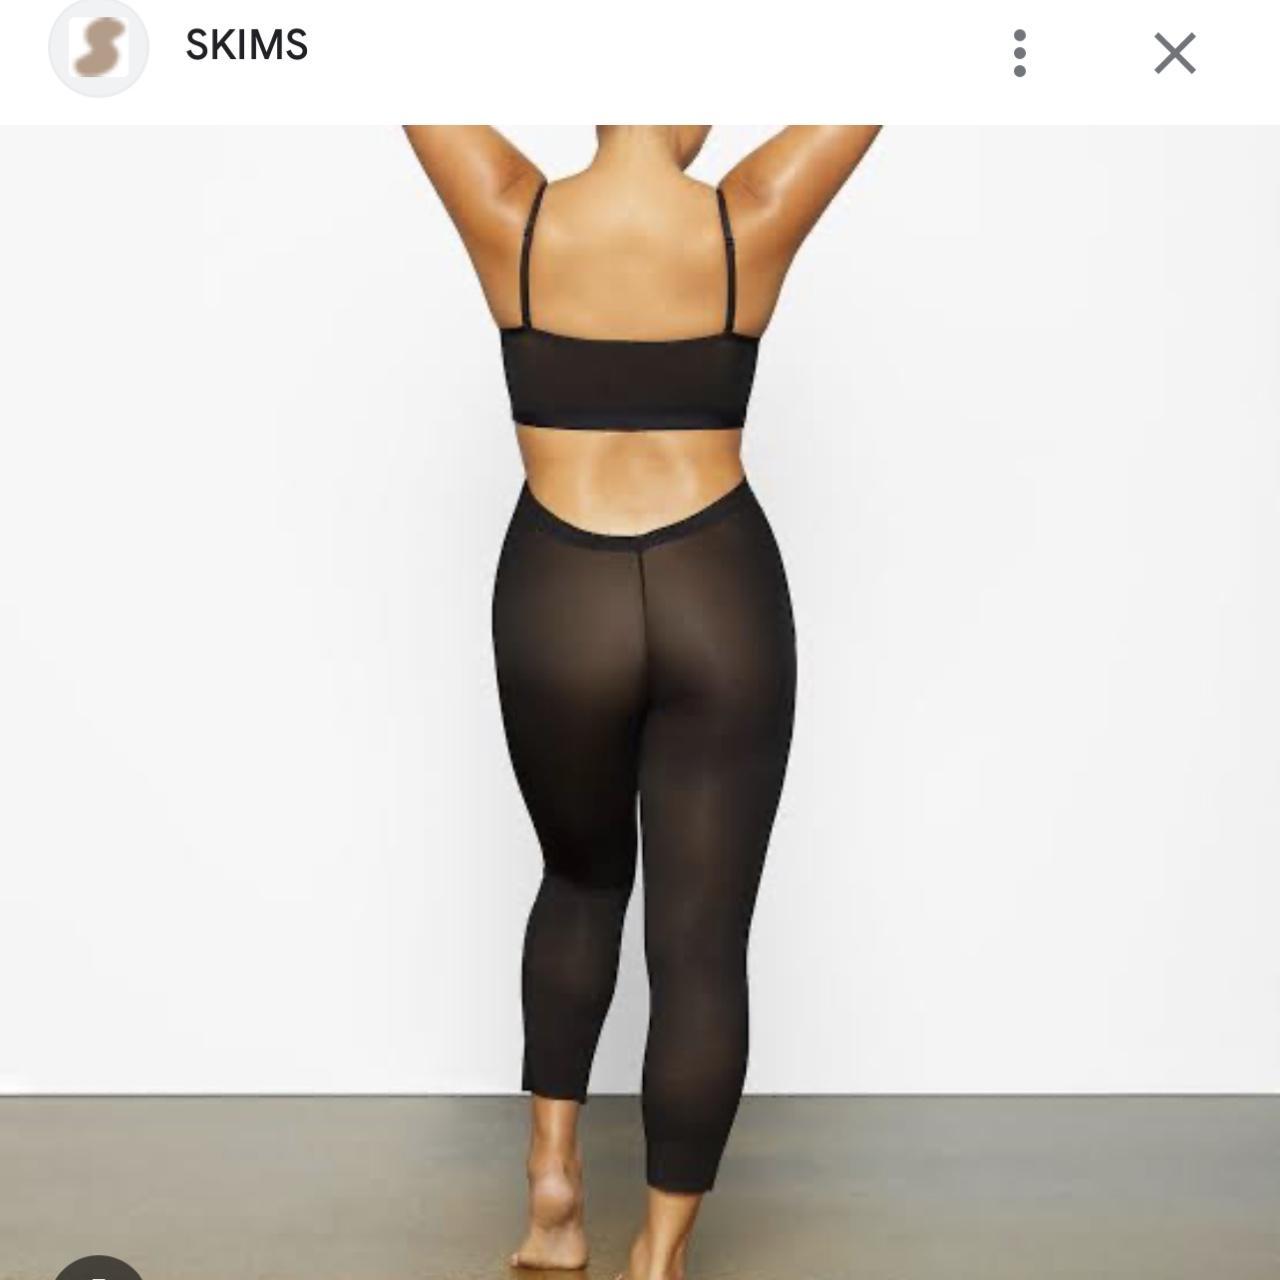 Skims, SHEER SCULPT LOW BACK LEGGING, Perfect to wear